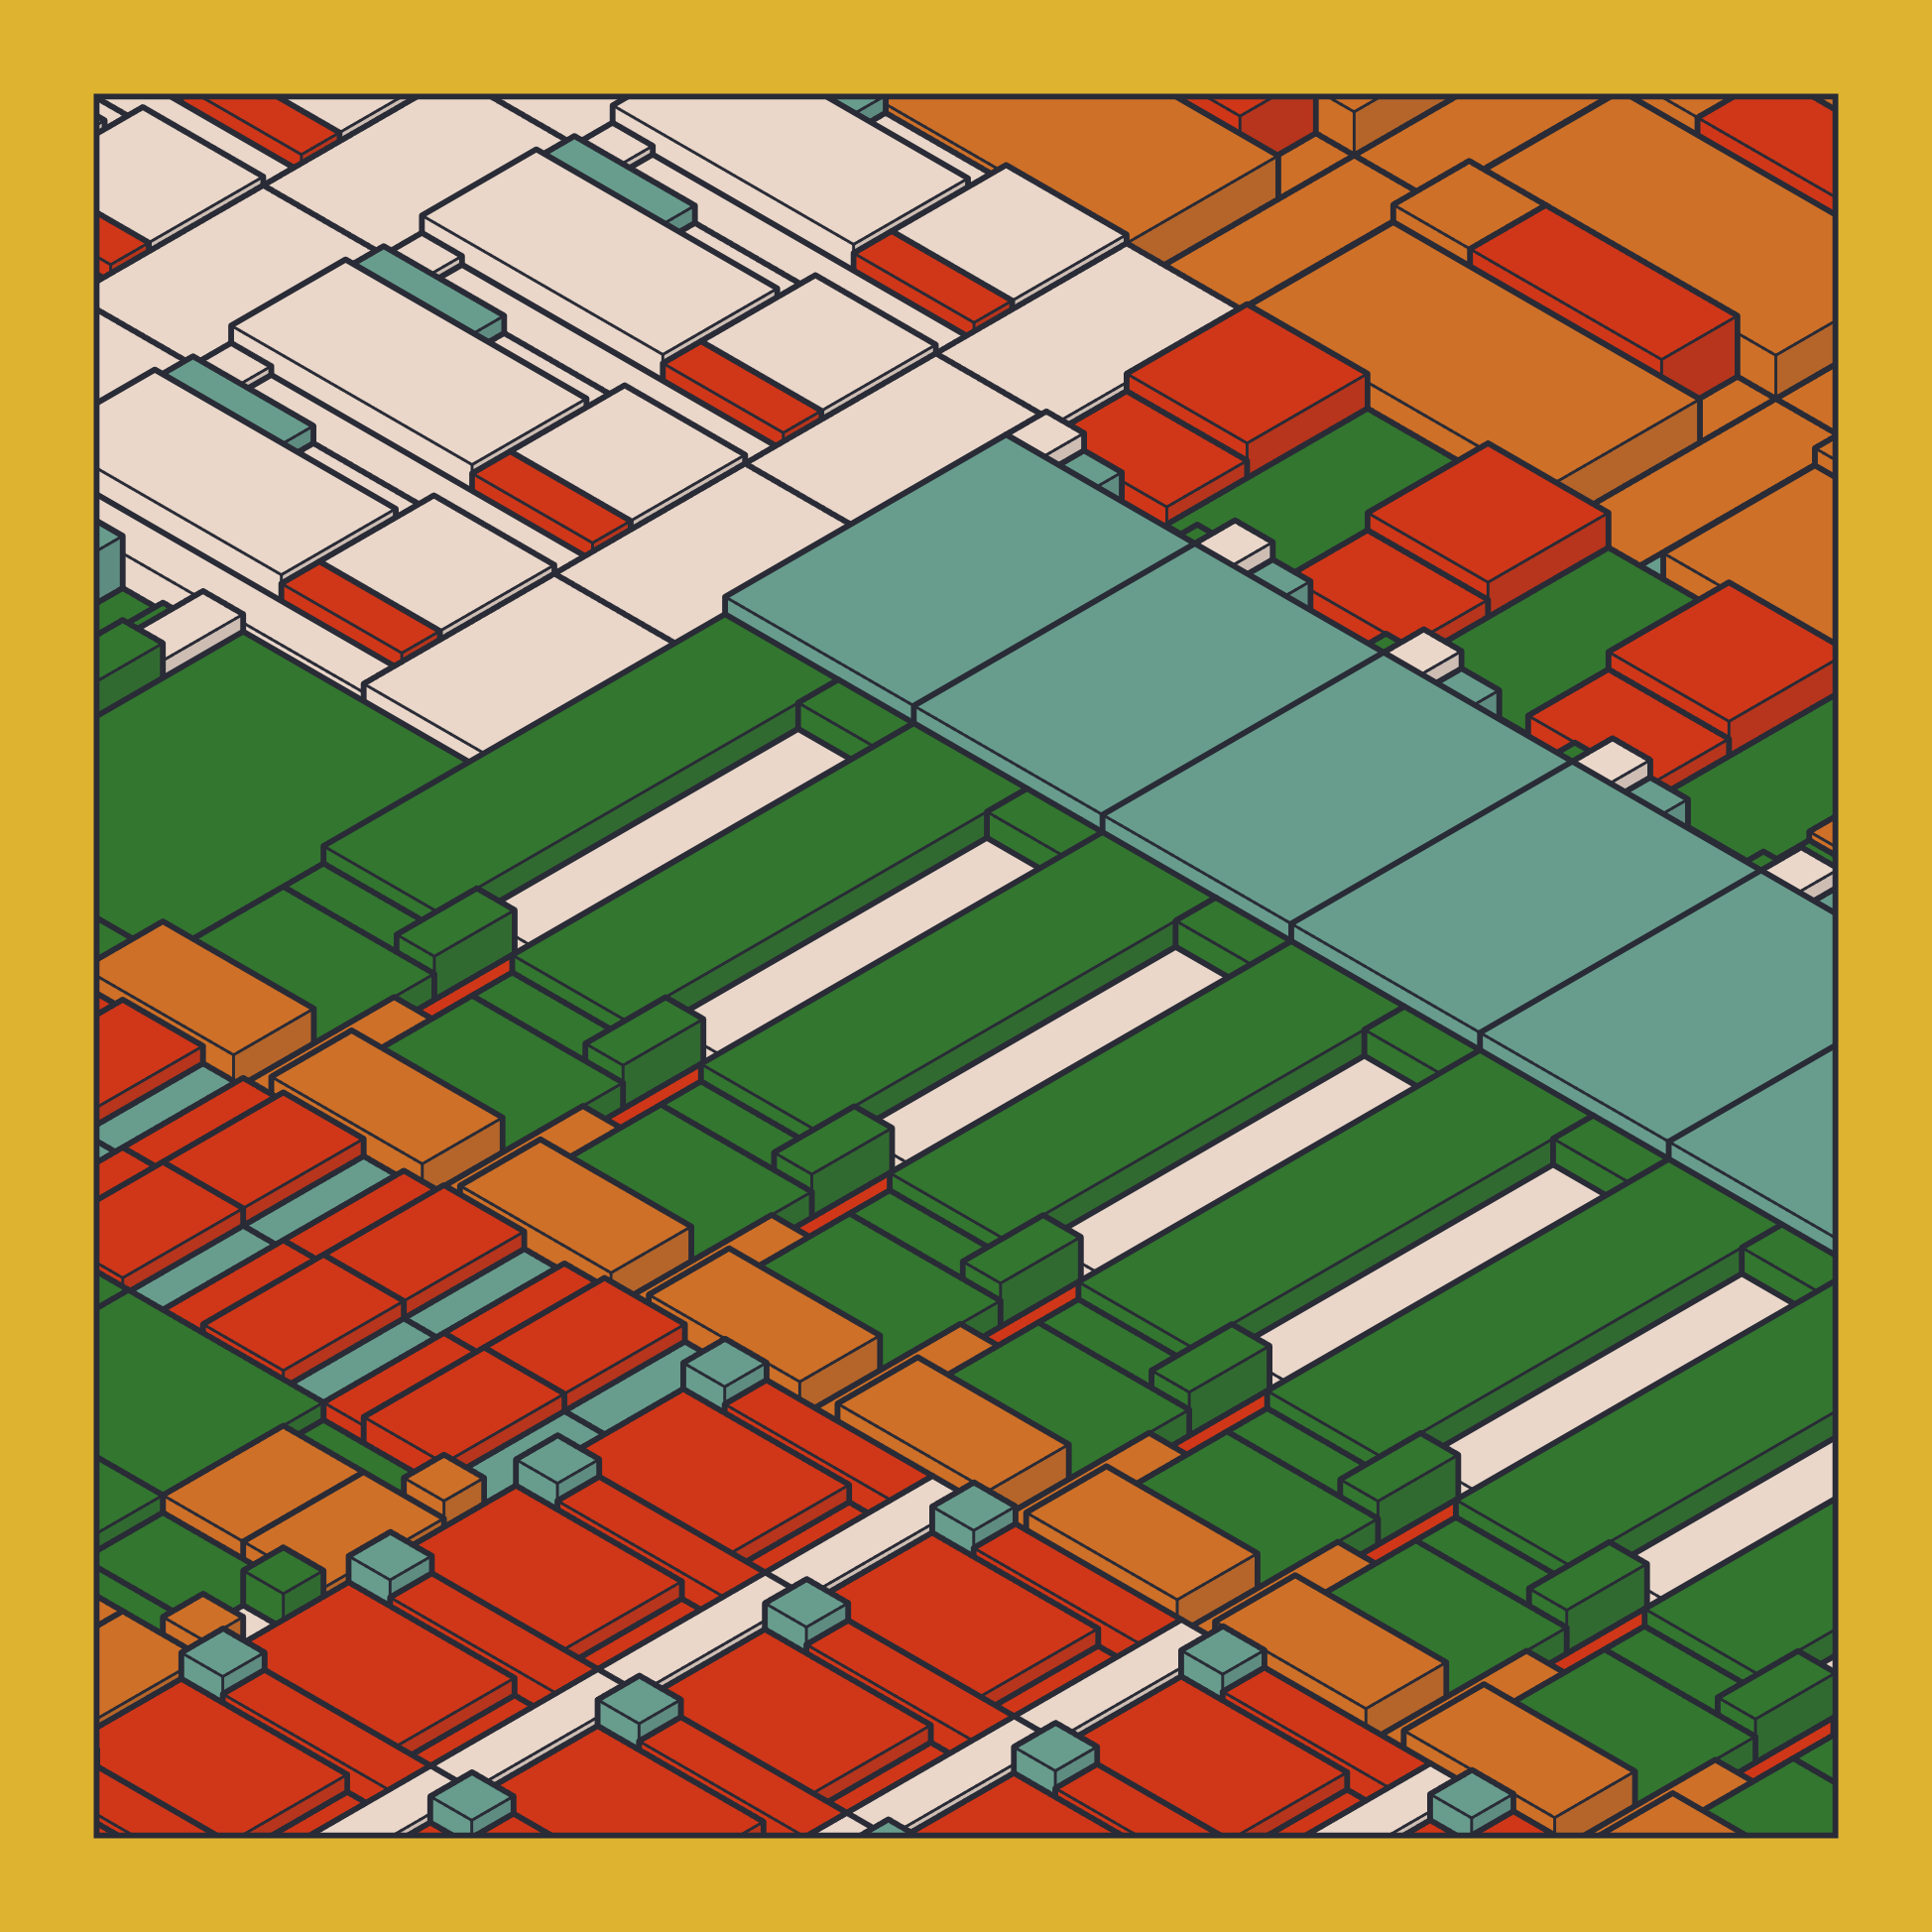 An abstract digital composition of quadrilateral volumes in shades of red, green, and orange